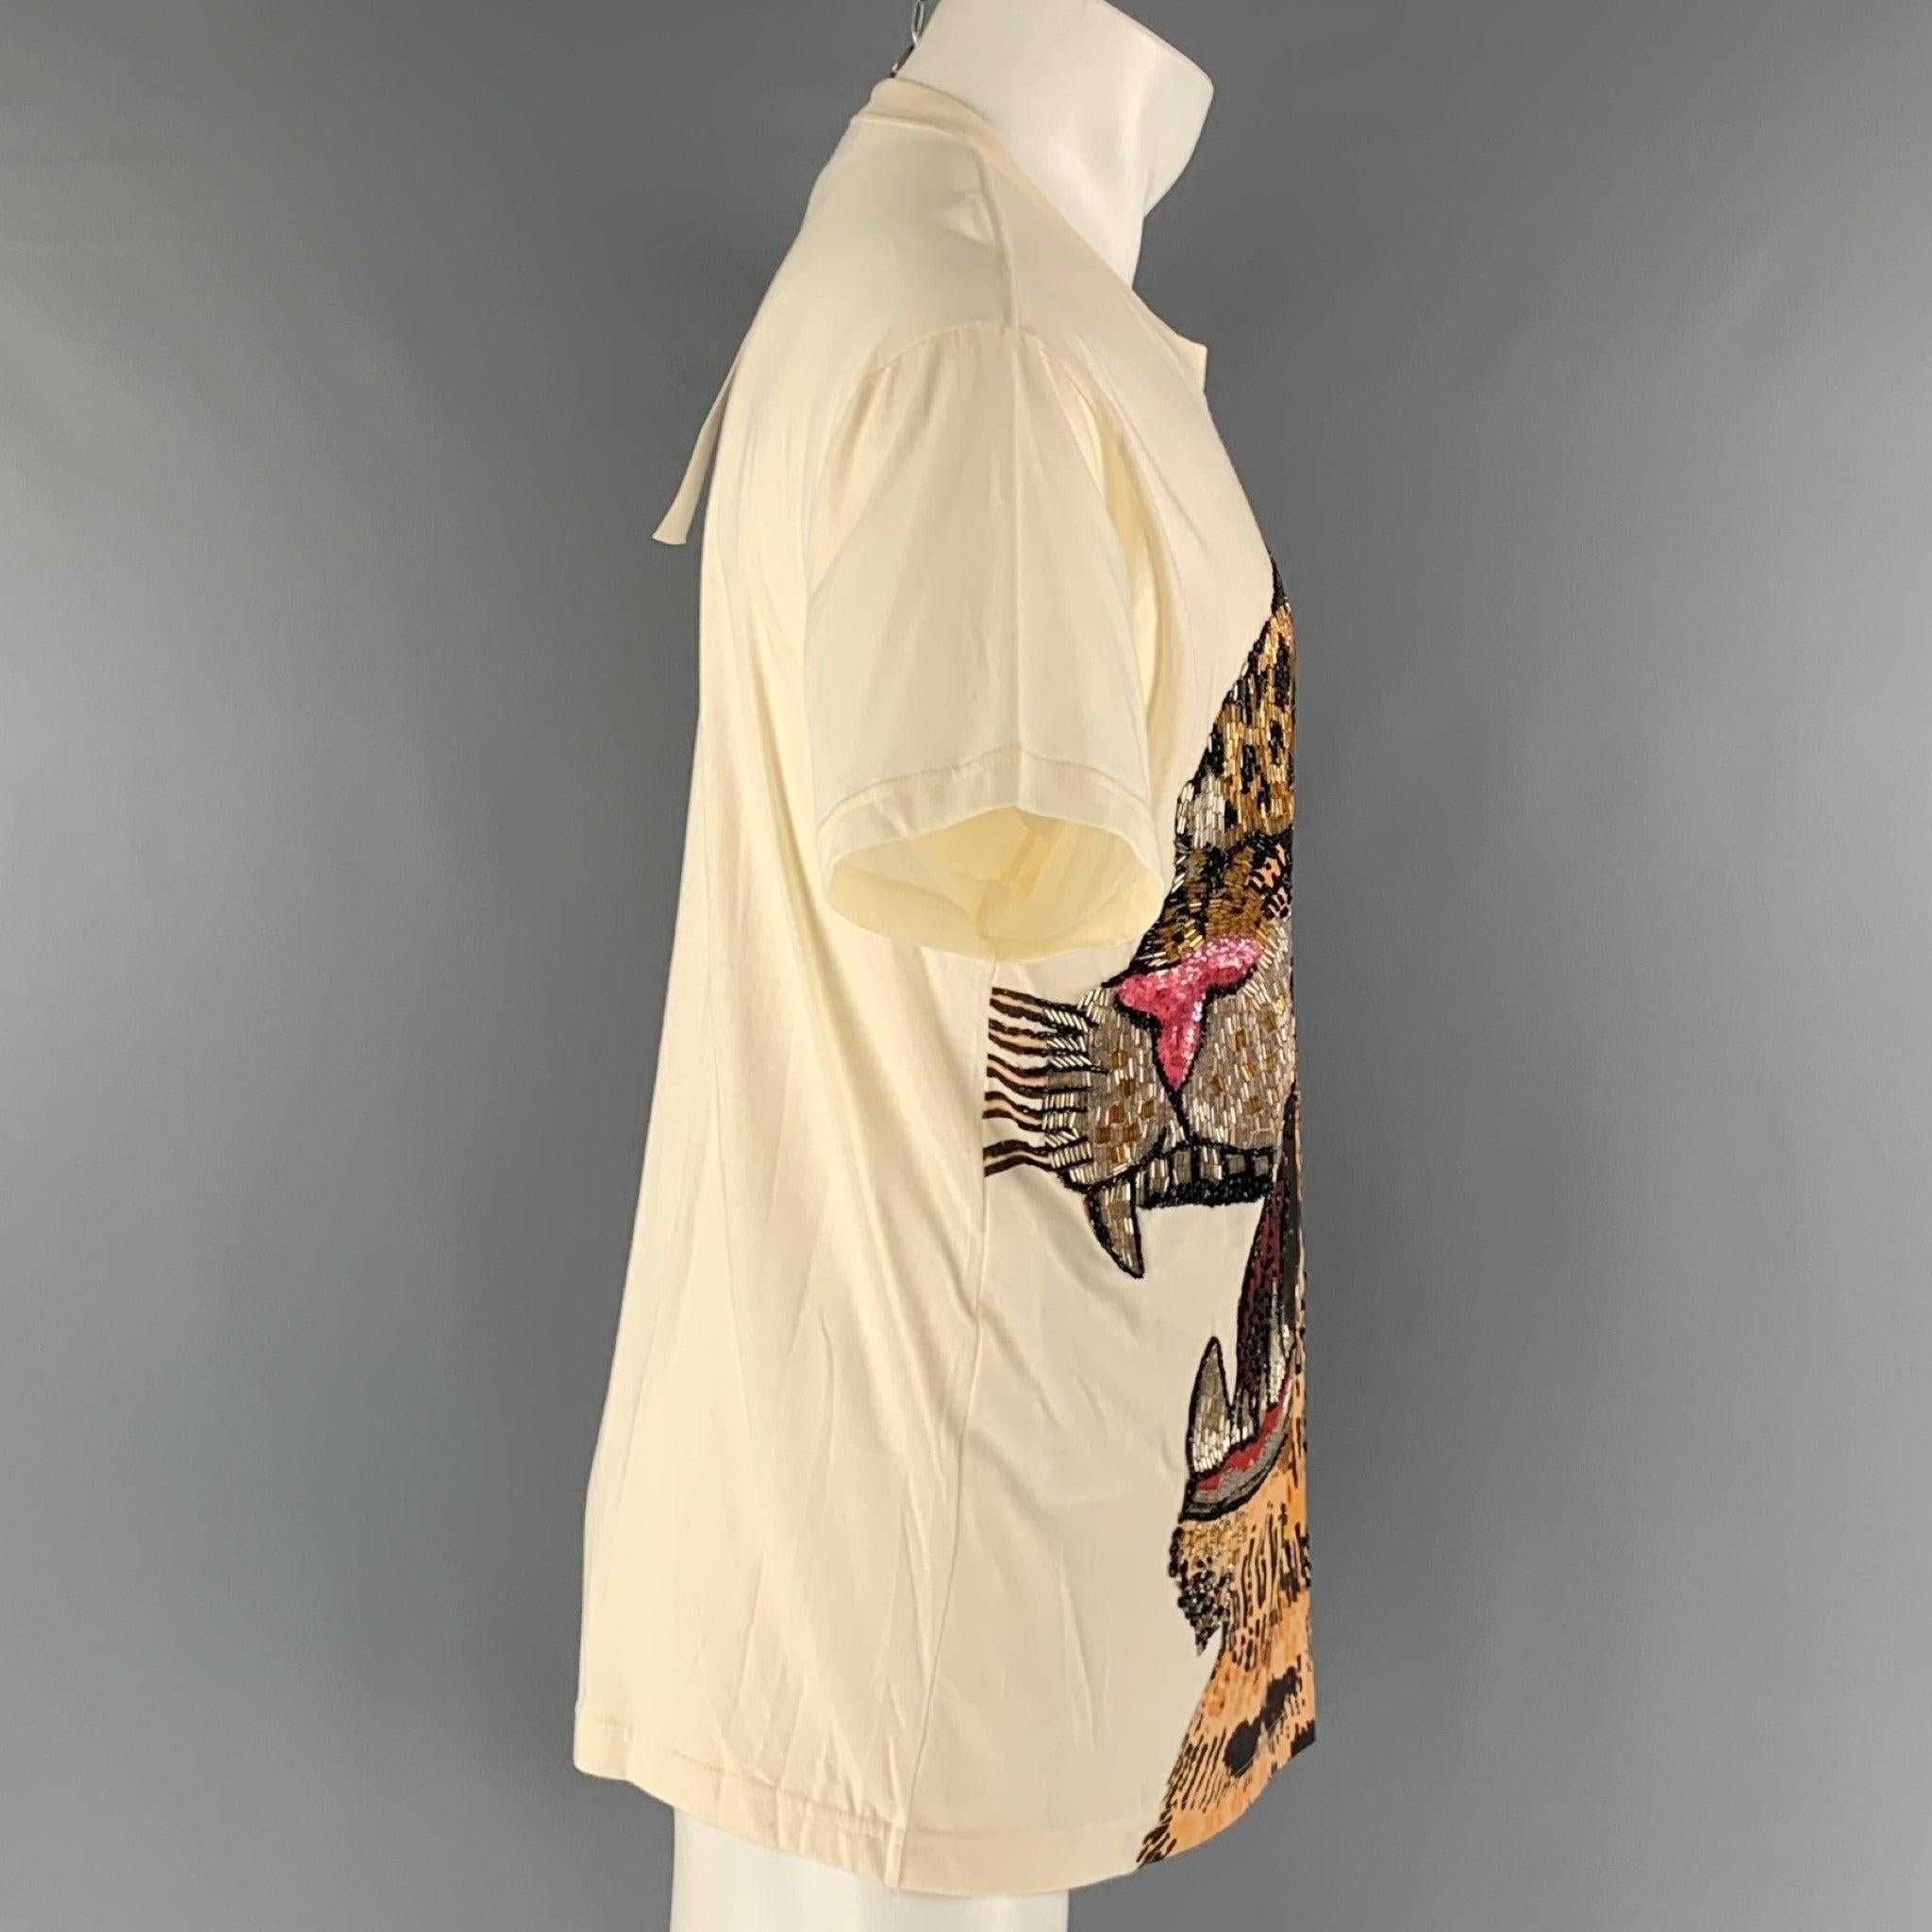 GUCCI F/W 2019 oversized t-shirt comes in a beige jersey cotton knit material featuring a feline print with bead and sequin embroidery design at front and a crew-neck. Made in Italy.New with Tags. 

Marked:   XXS 

Measurements: 
 
Shoulder: 21.5